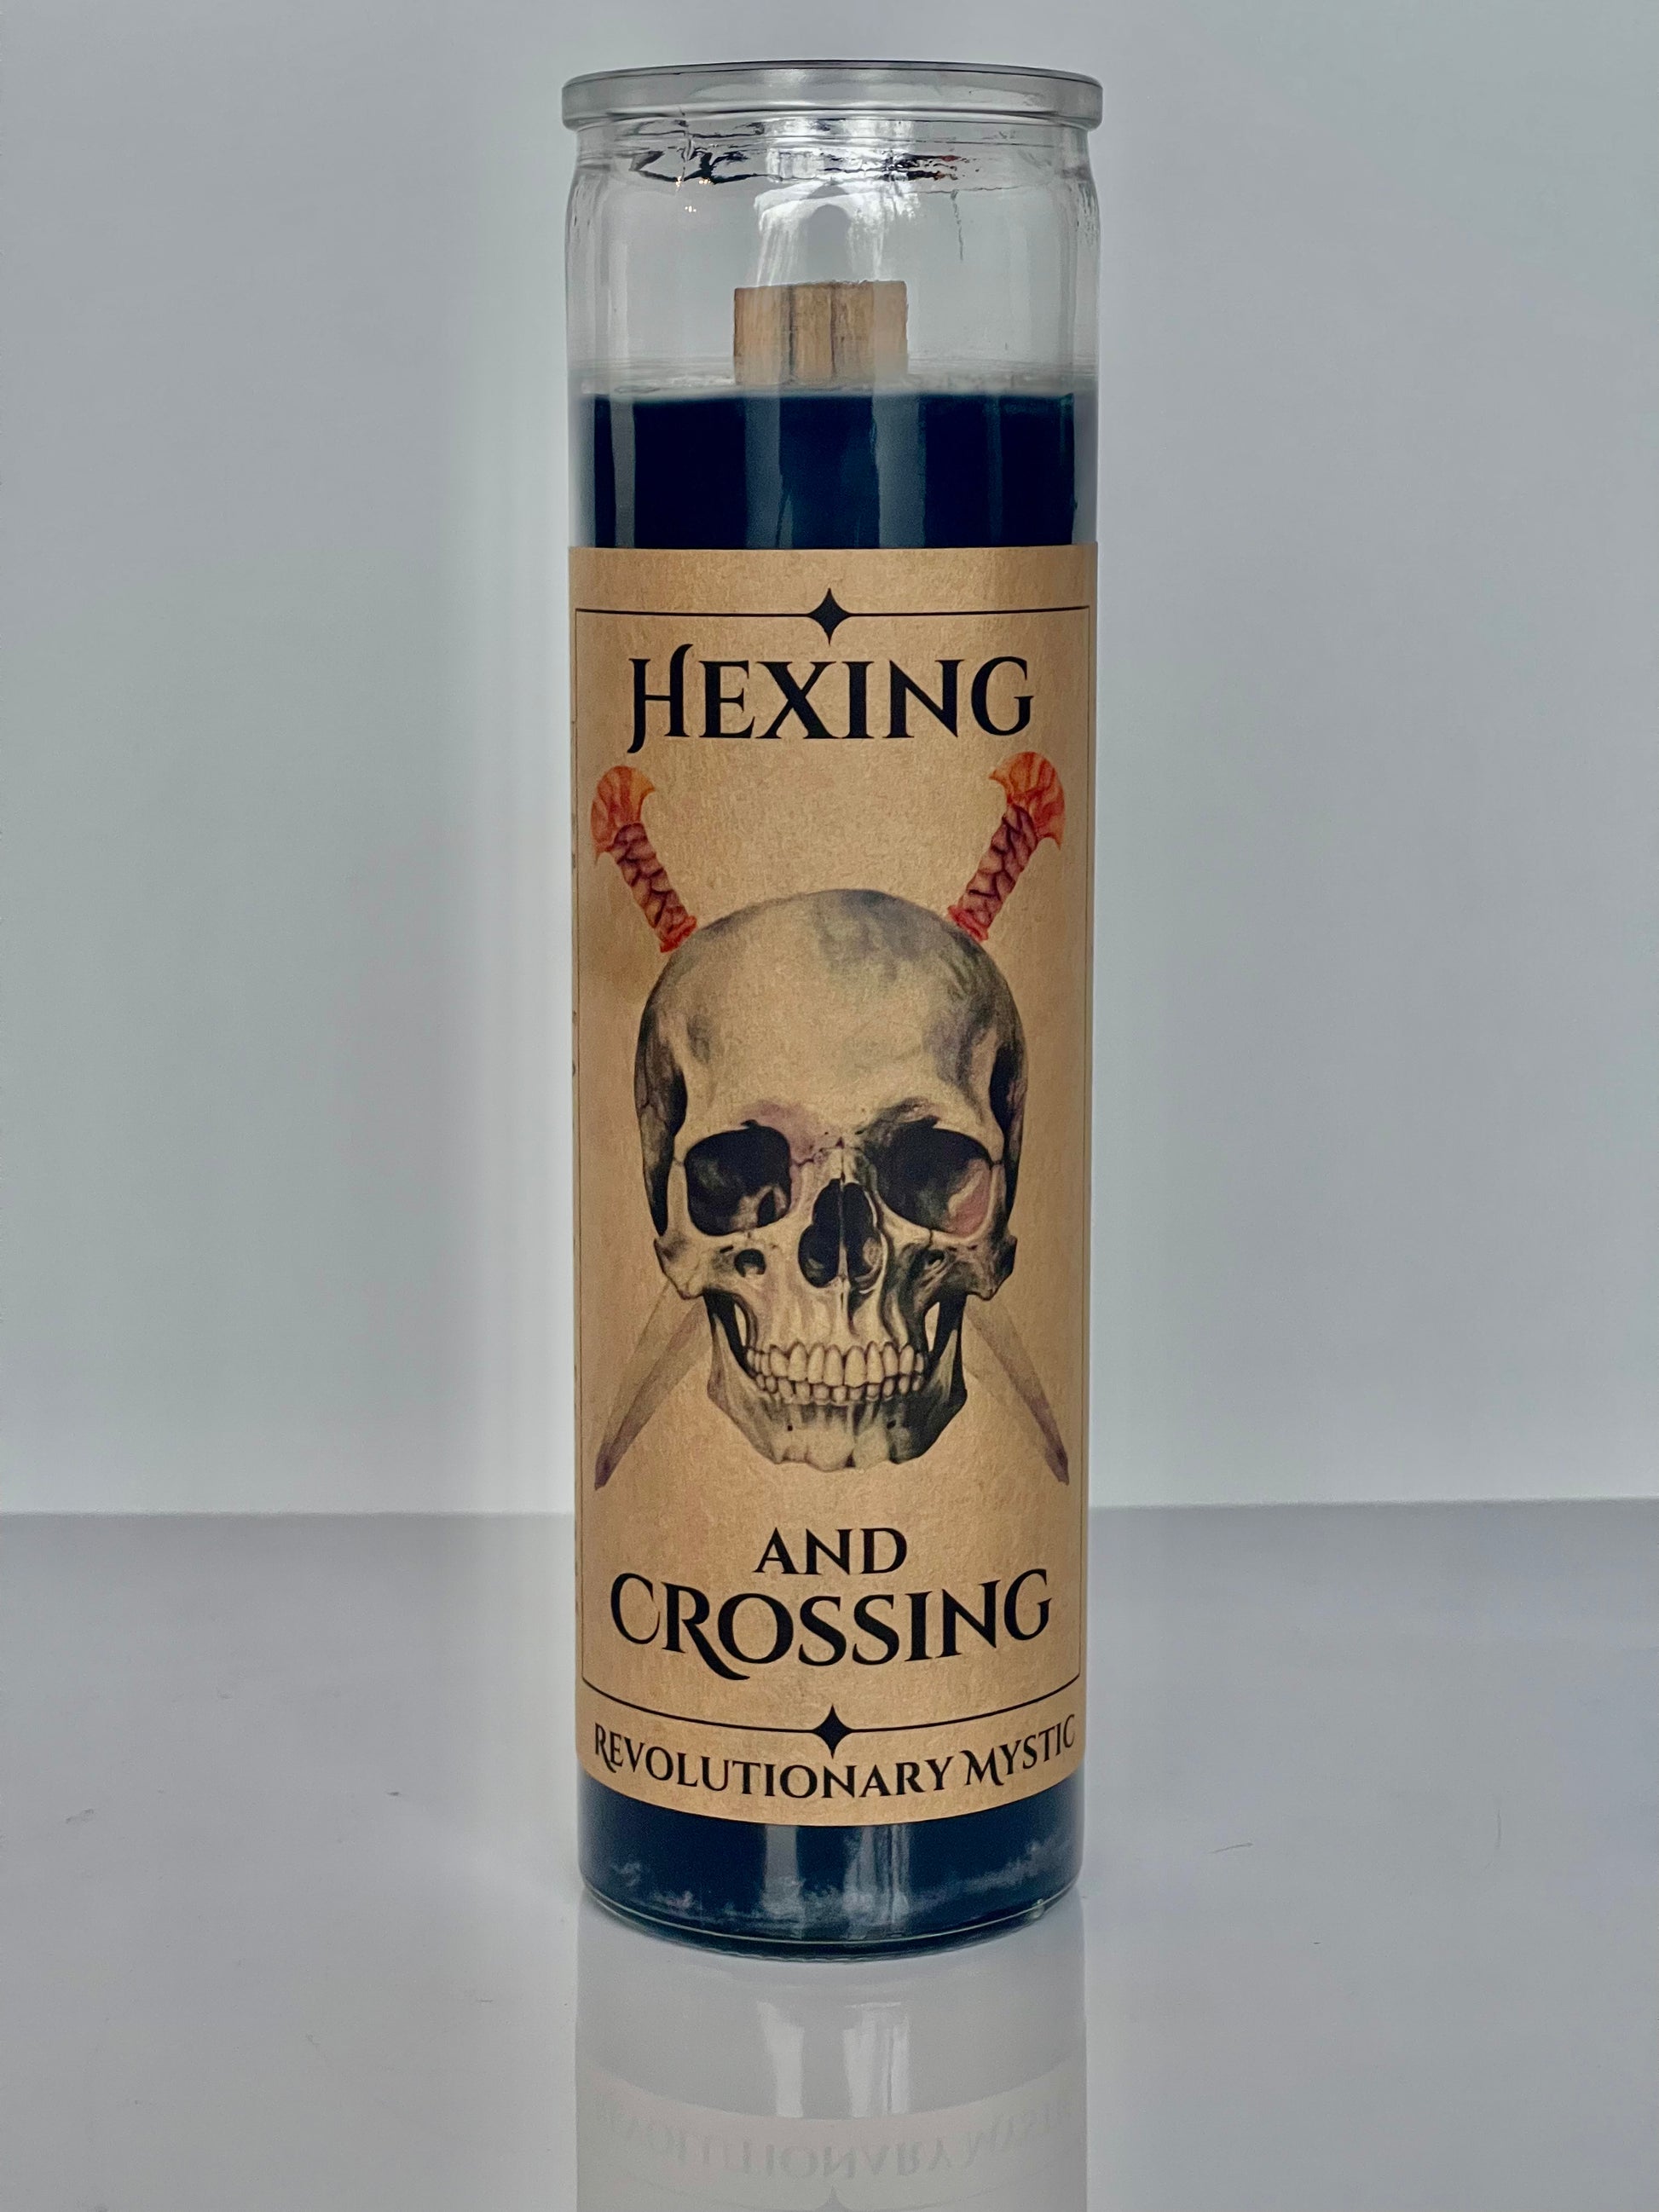 Hexing and Crossing Candle - Revolutionary Mystic